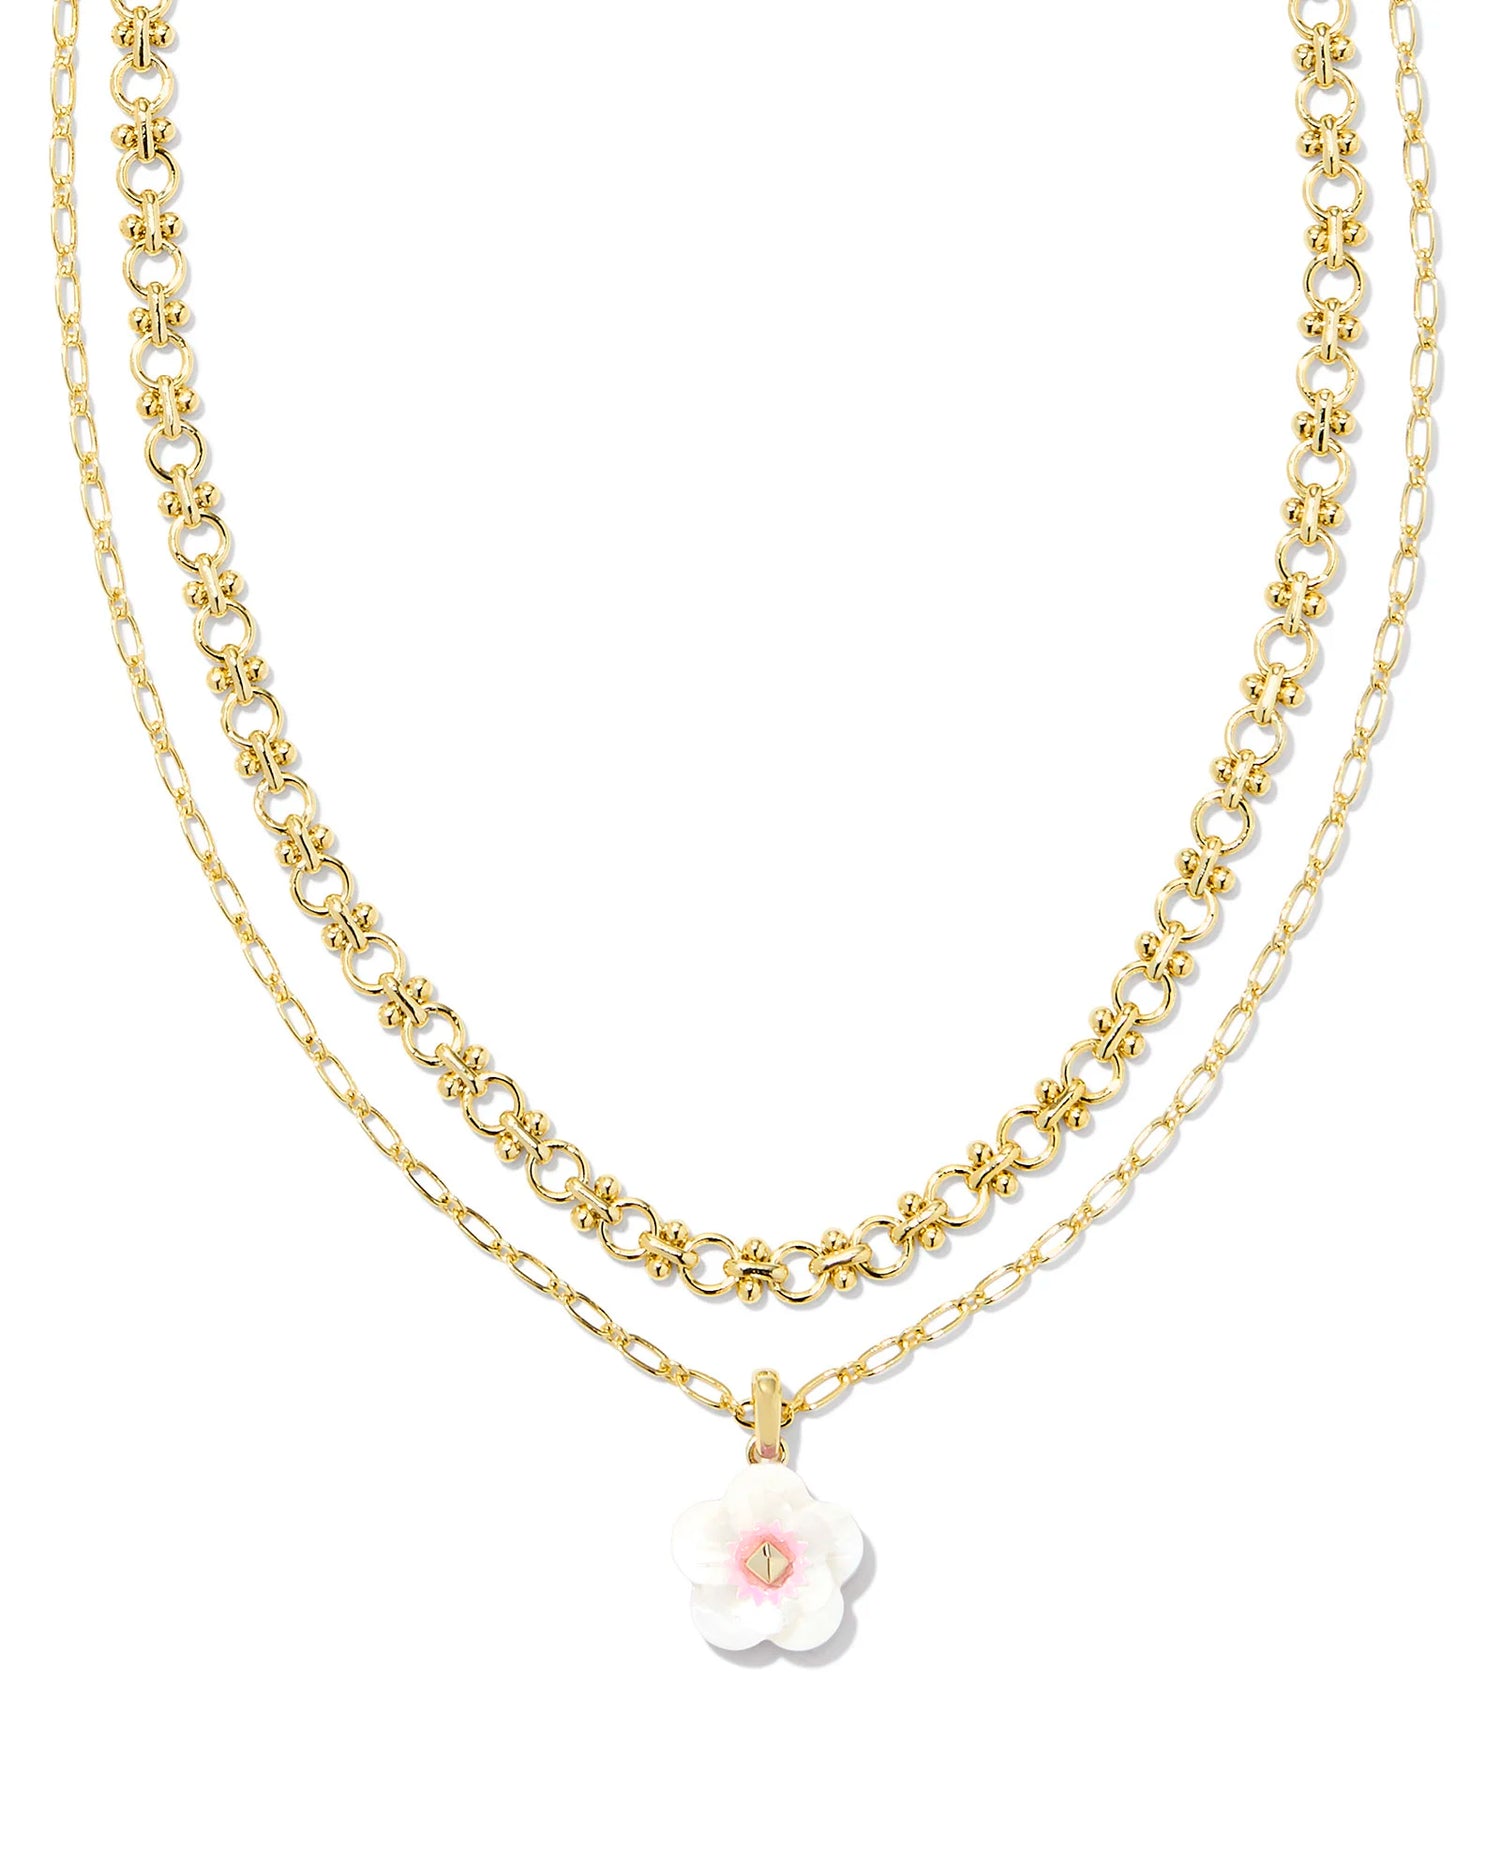 Bright Star 14k Yellow Gold Necklace in White Sapphire